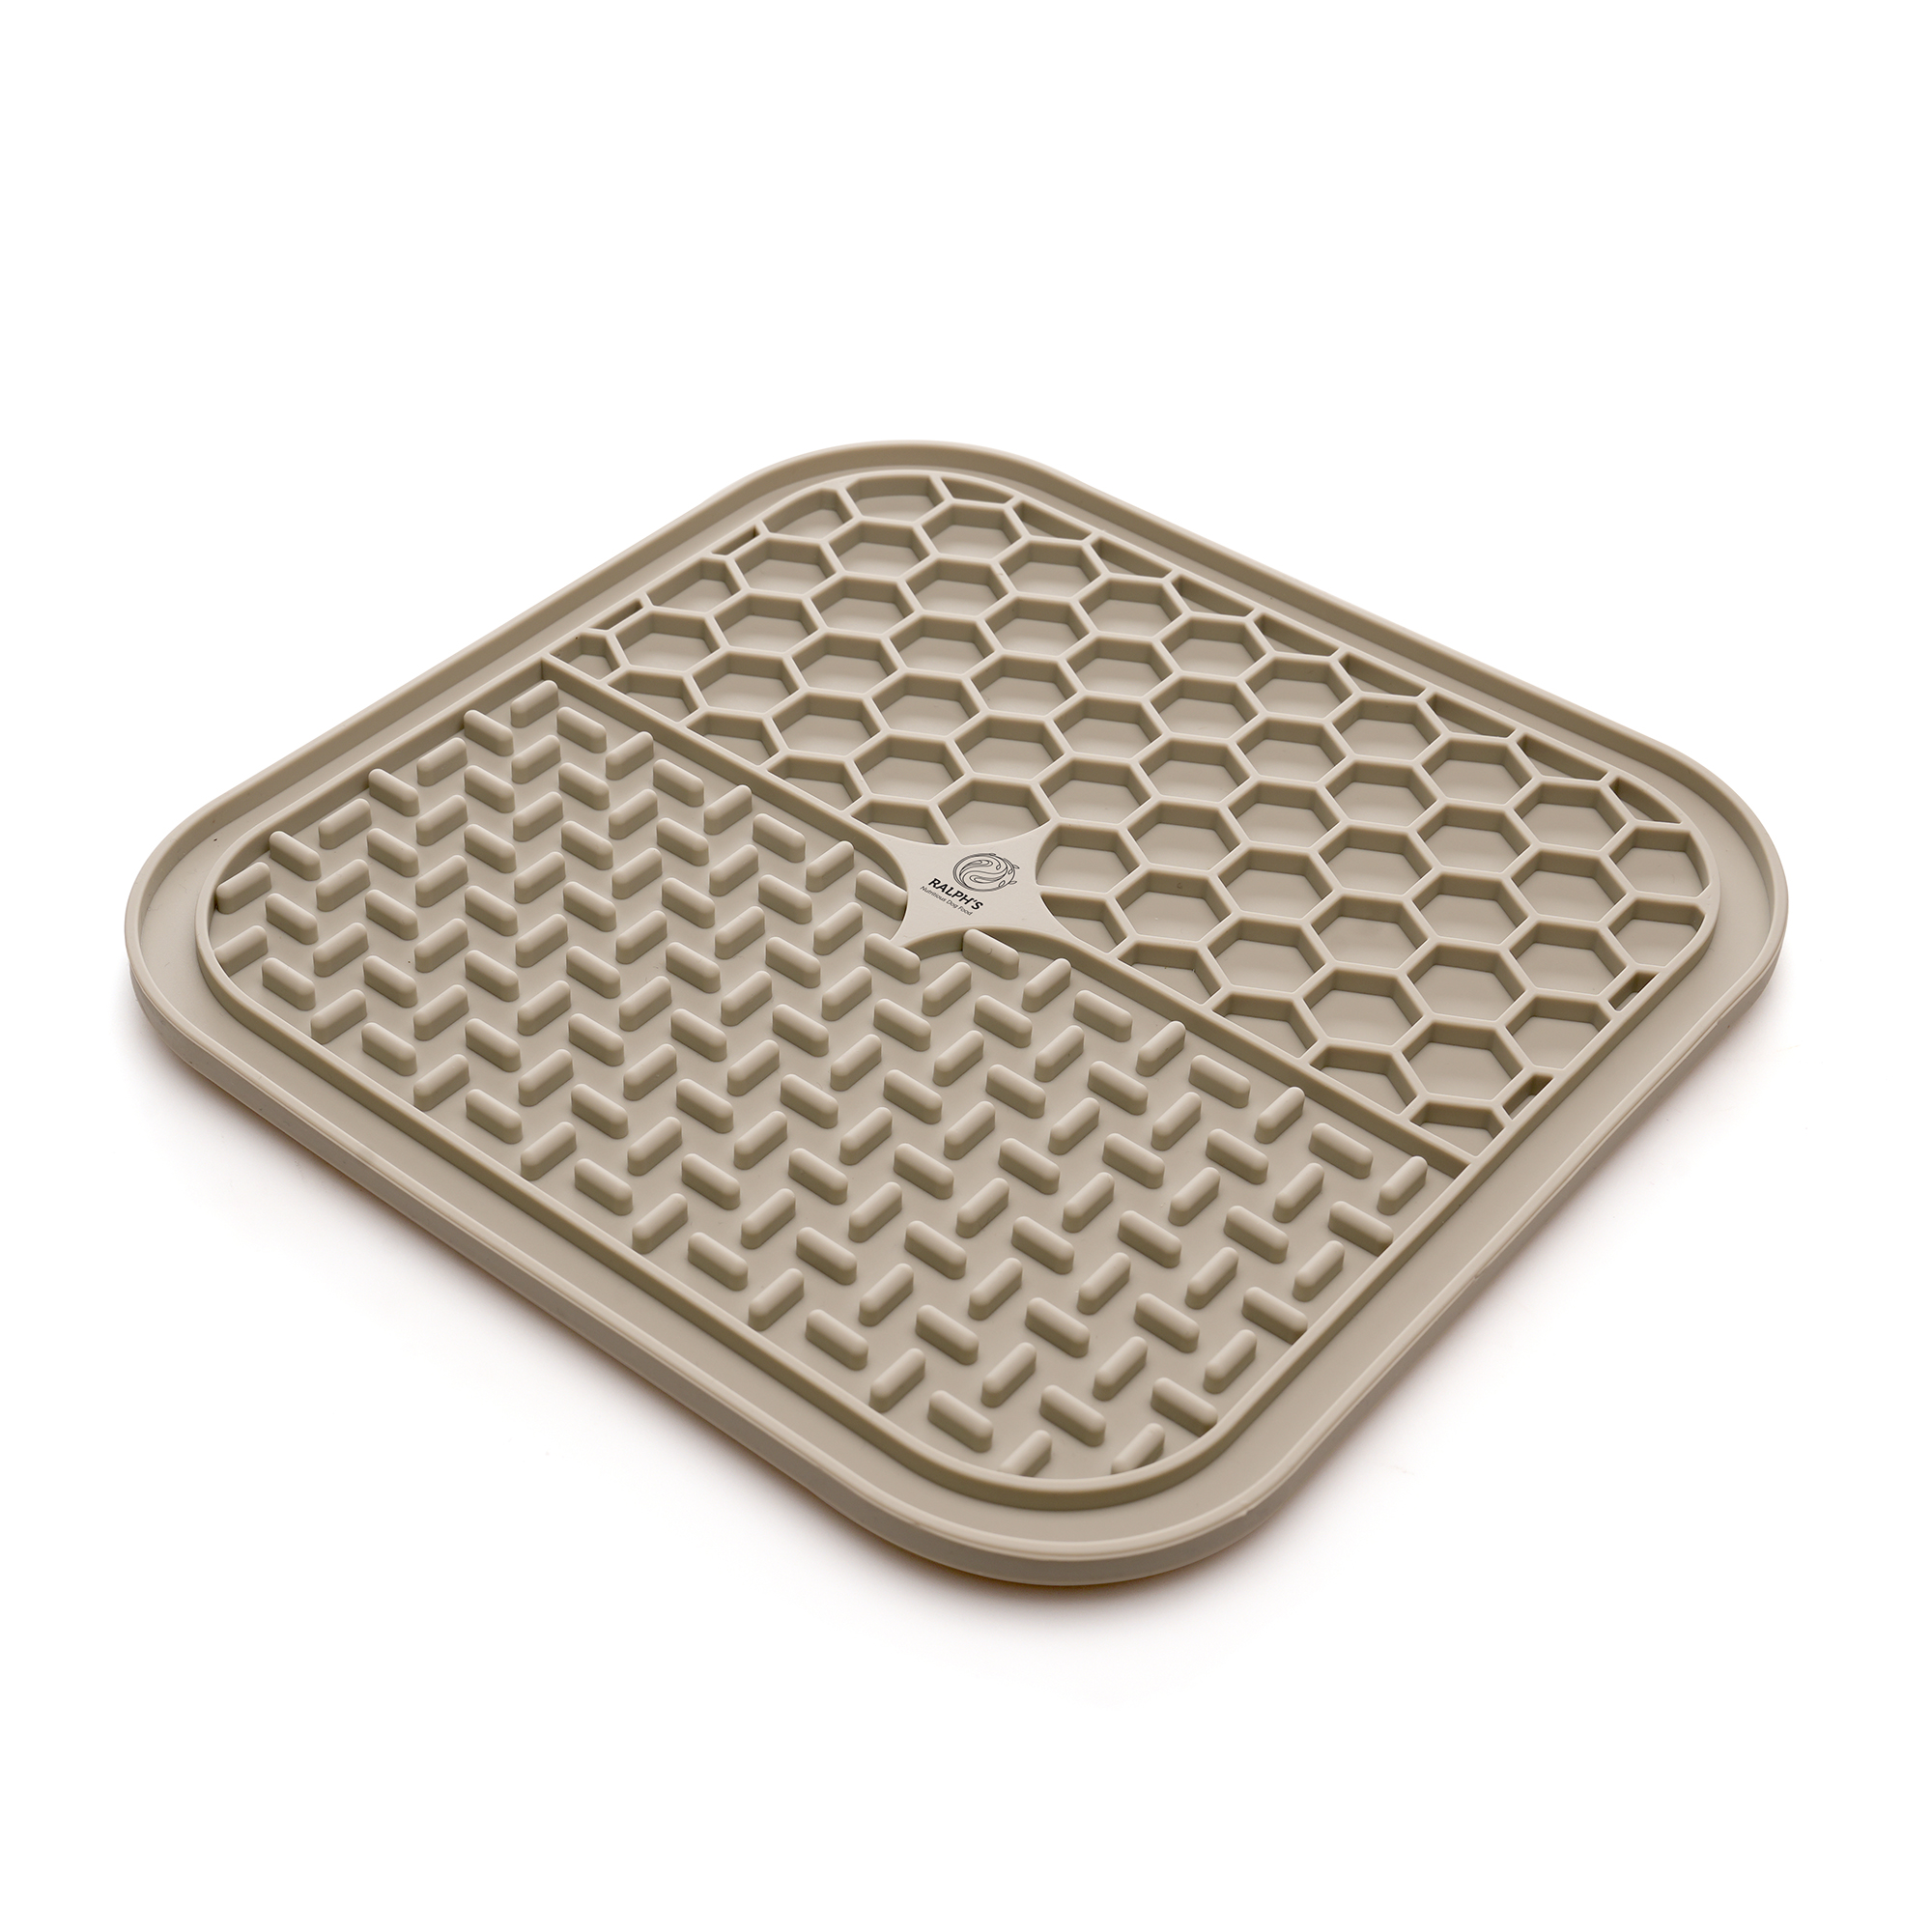 Bespoke licking mat with suction cup and spatula included. Made for pets using high-quality food-grade silicone material. Pantone matched.